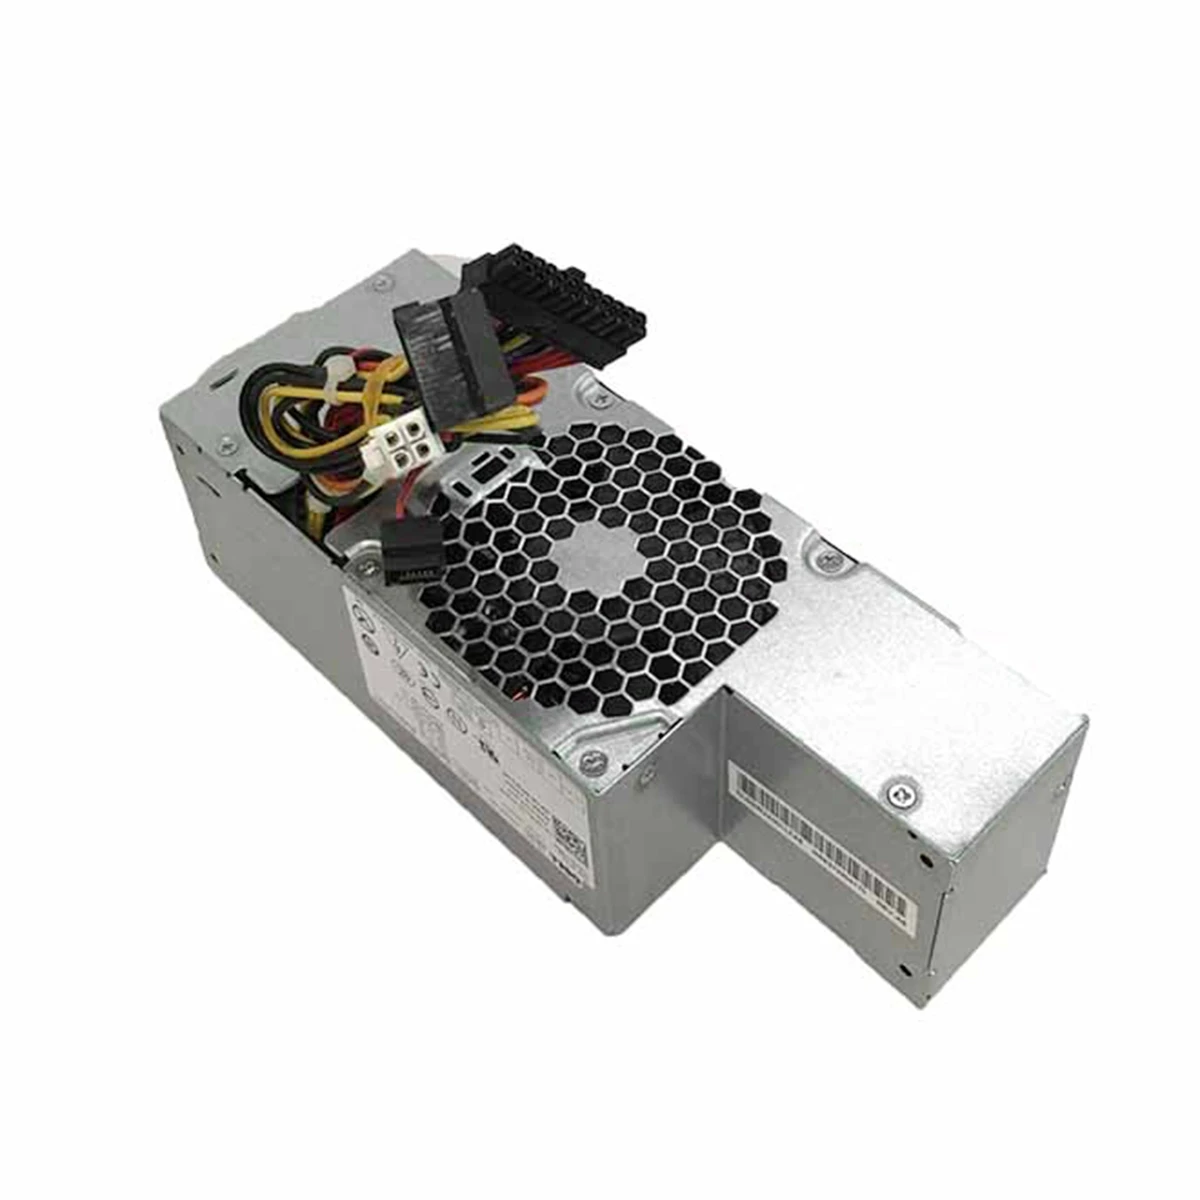 

H235P-00 for Dell OptiPlex380 580 760 780 960 980SFF Series Host Power Supply